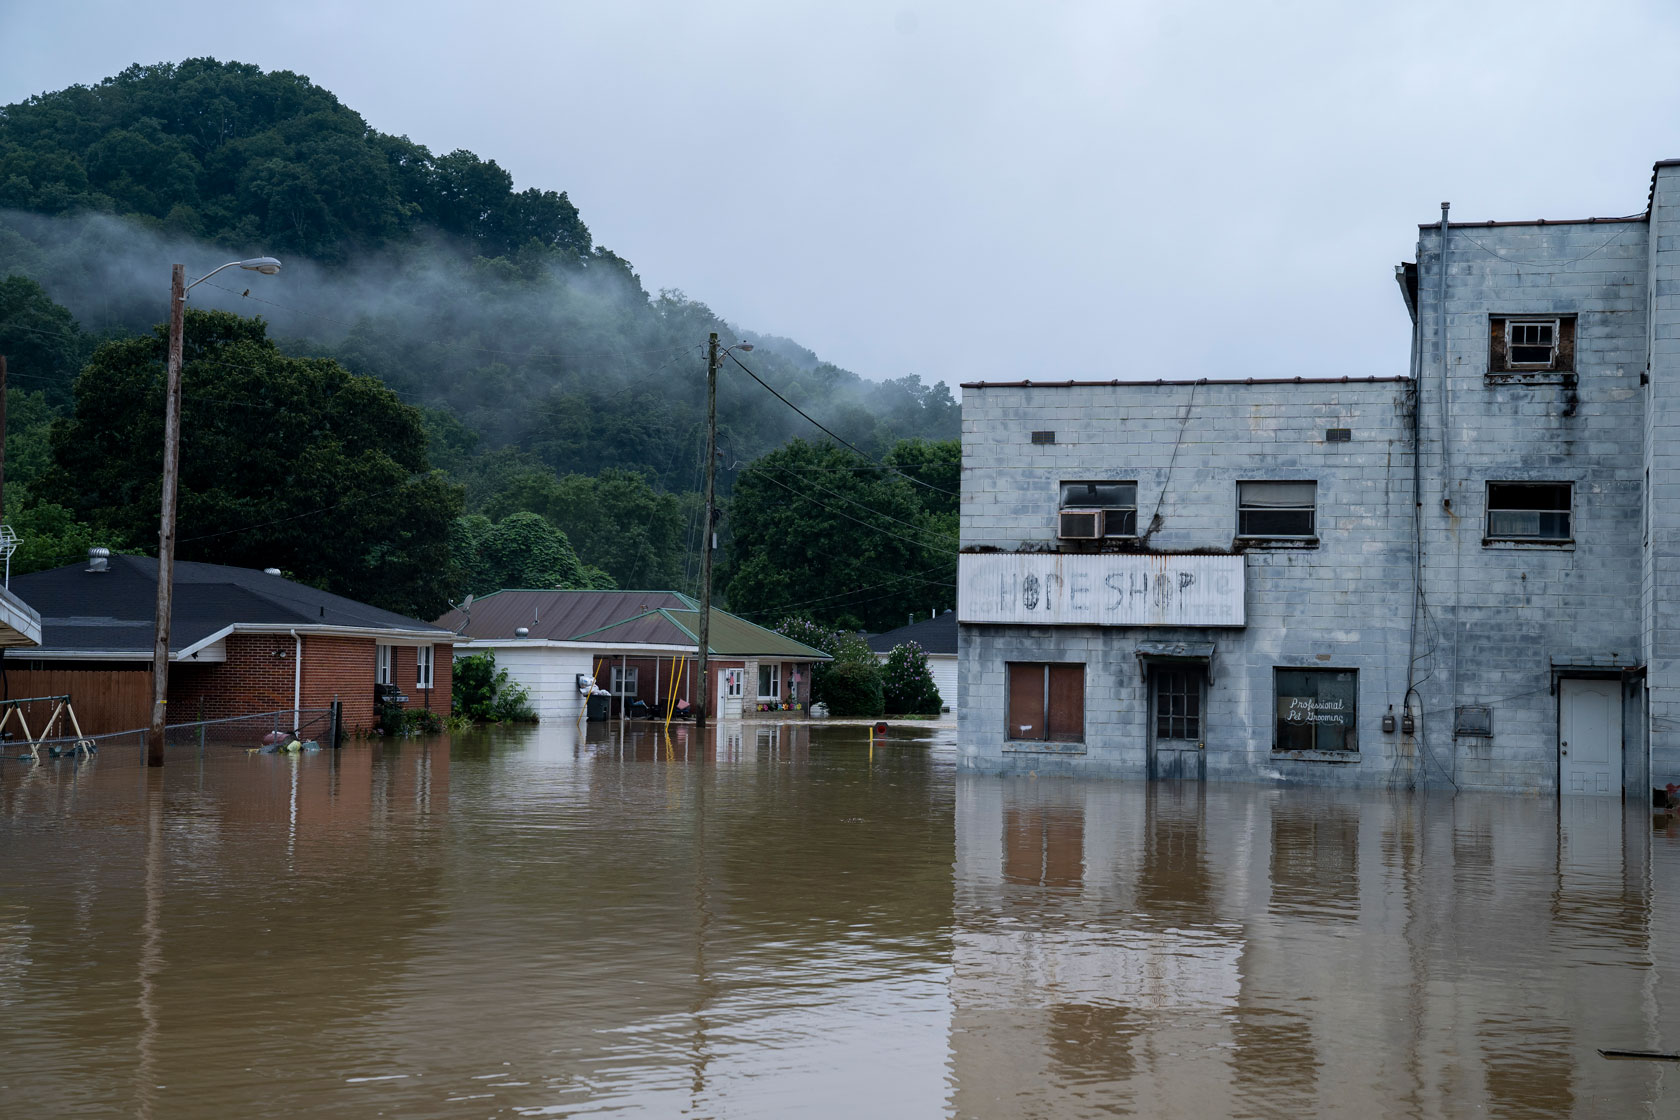 Photo shows a flooded street in Kentucky.